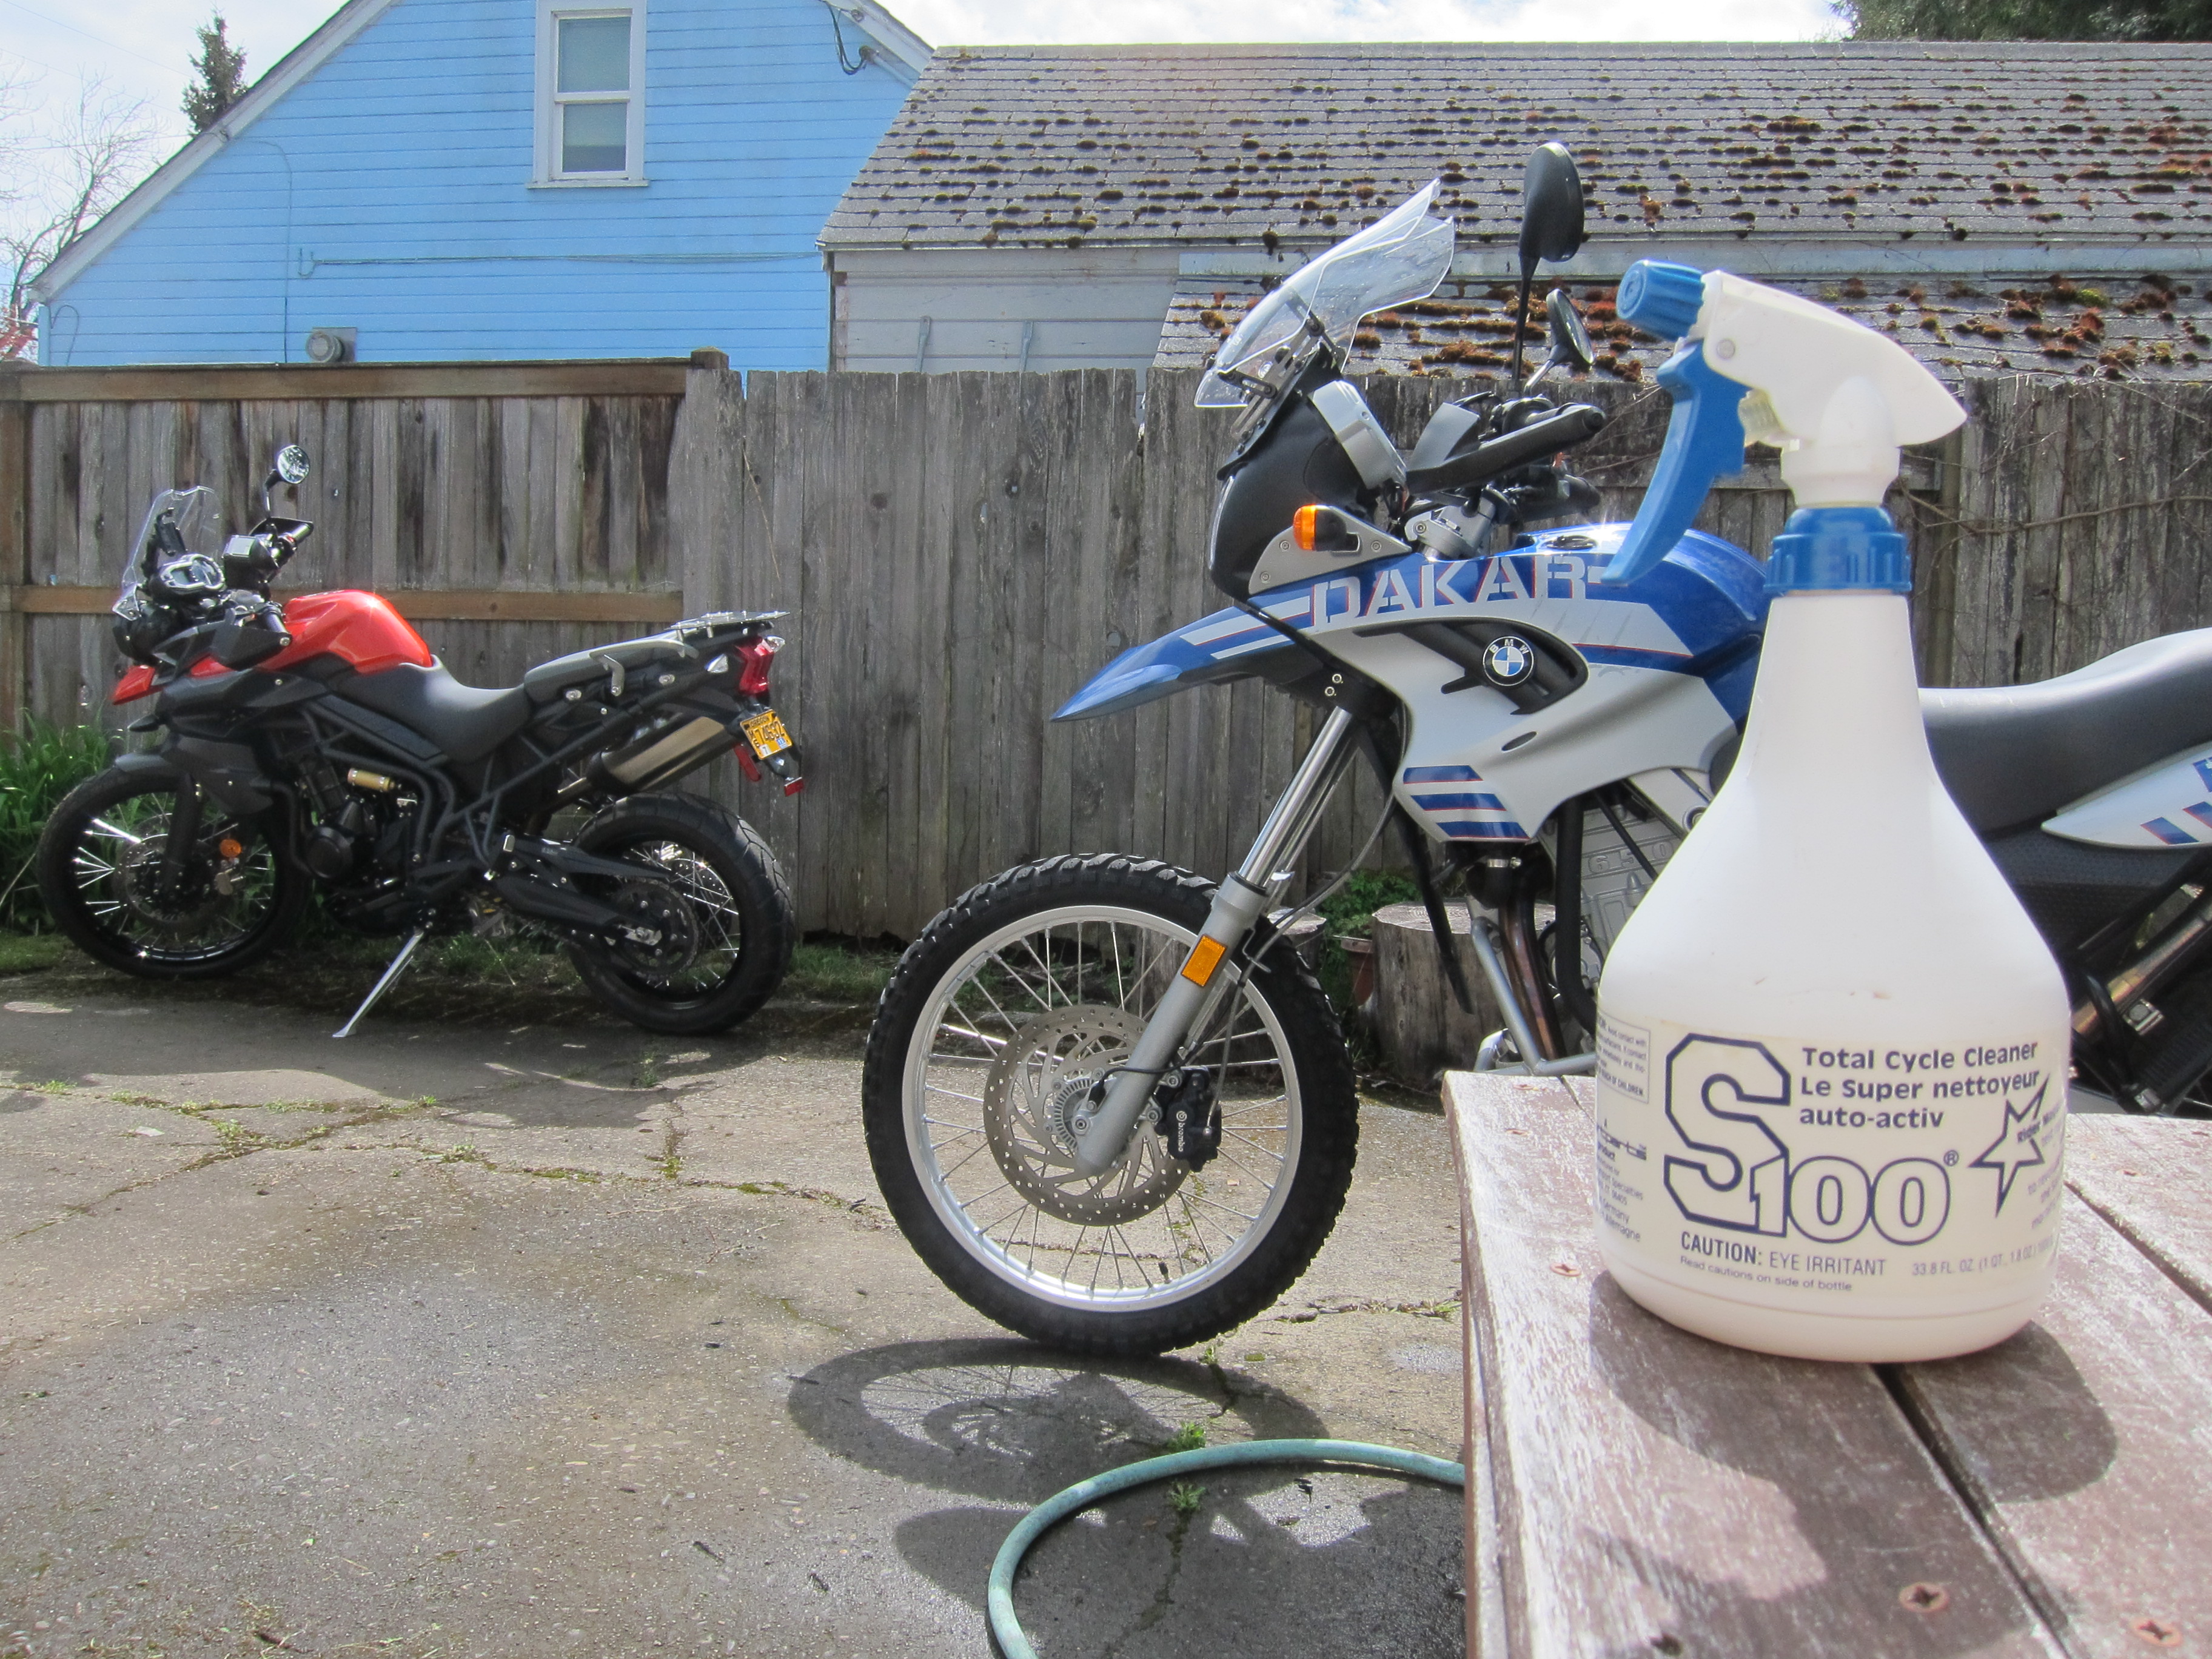 Spring Cleaning – The S100 Cycle Cleaner to the rescue